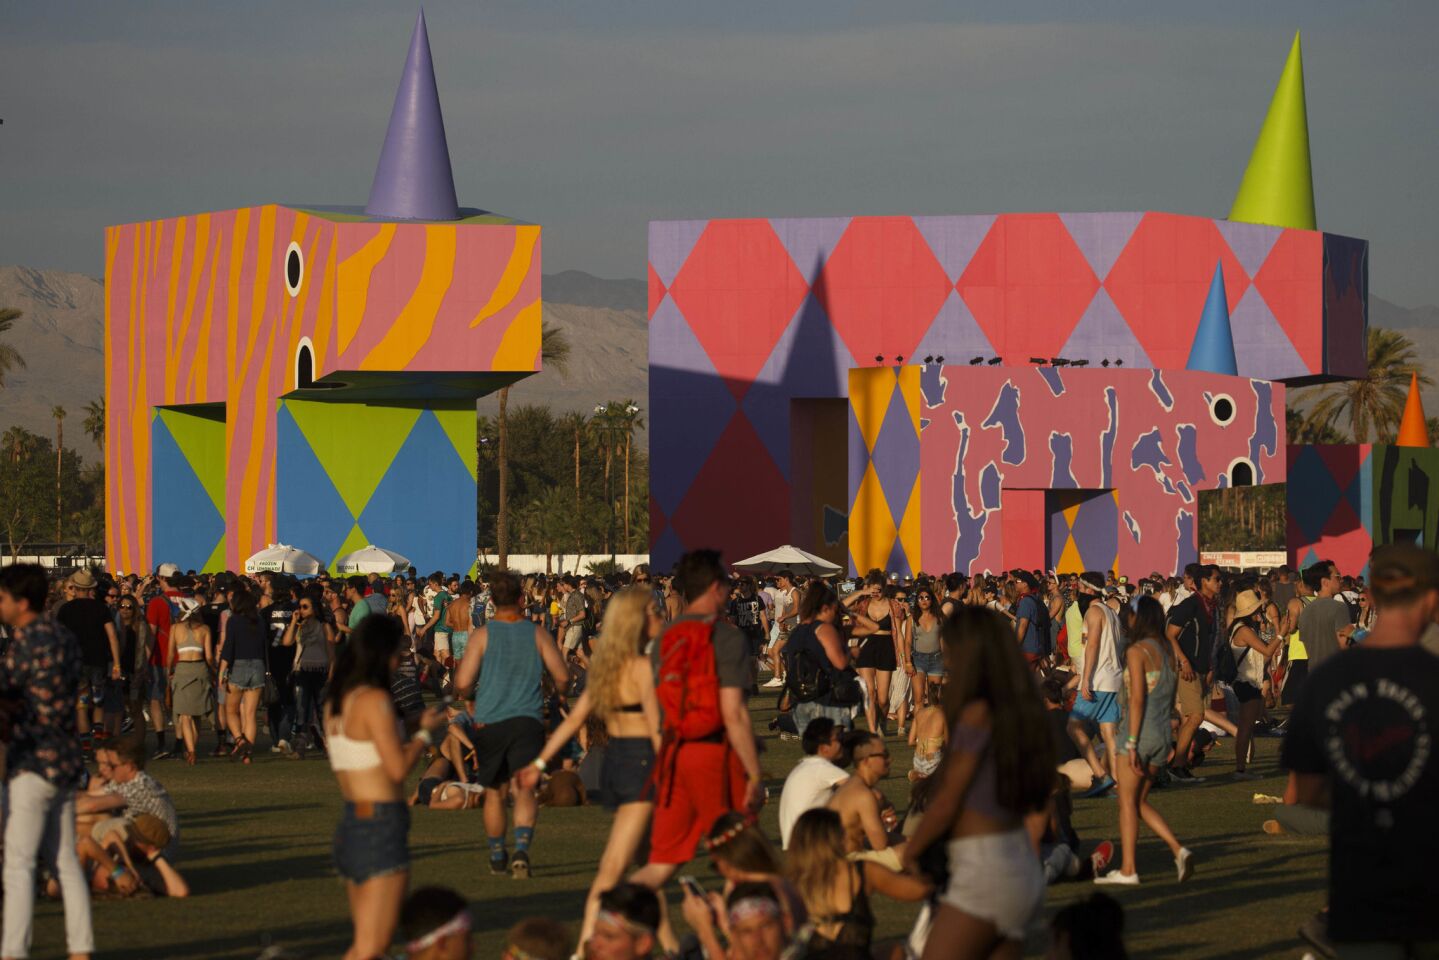 Coachella attendees walk on the fields past the art project "is this what brings things into focus?" by Joanne Tatham and Tom O'Sullivan, during weekend one of the three-day Coachella Valley Music and Arts Festival at the Empire Polo Grounds on Sunday, April 16, 2017 in Indio, Calif. (Patrick T. Fallon/ For The Los Angeles Times)